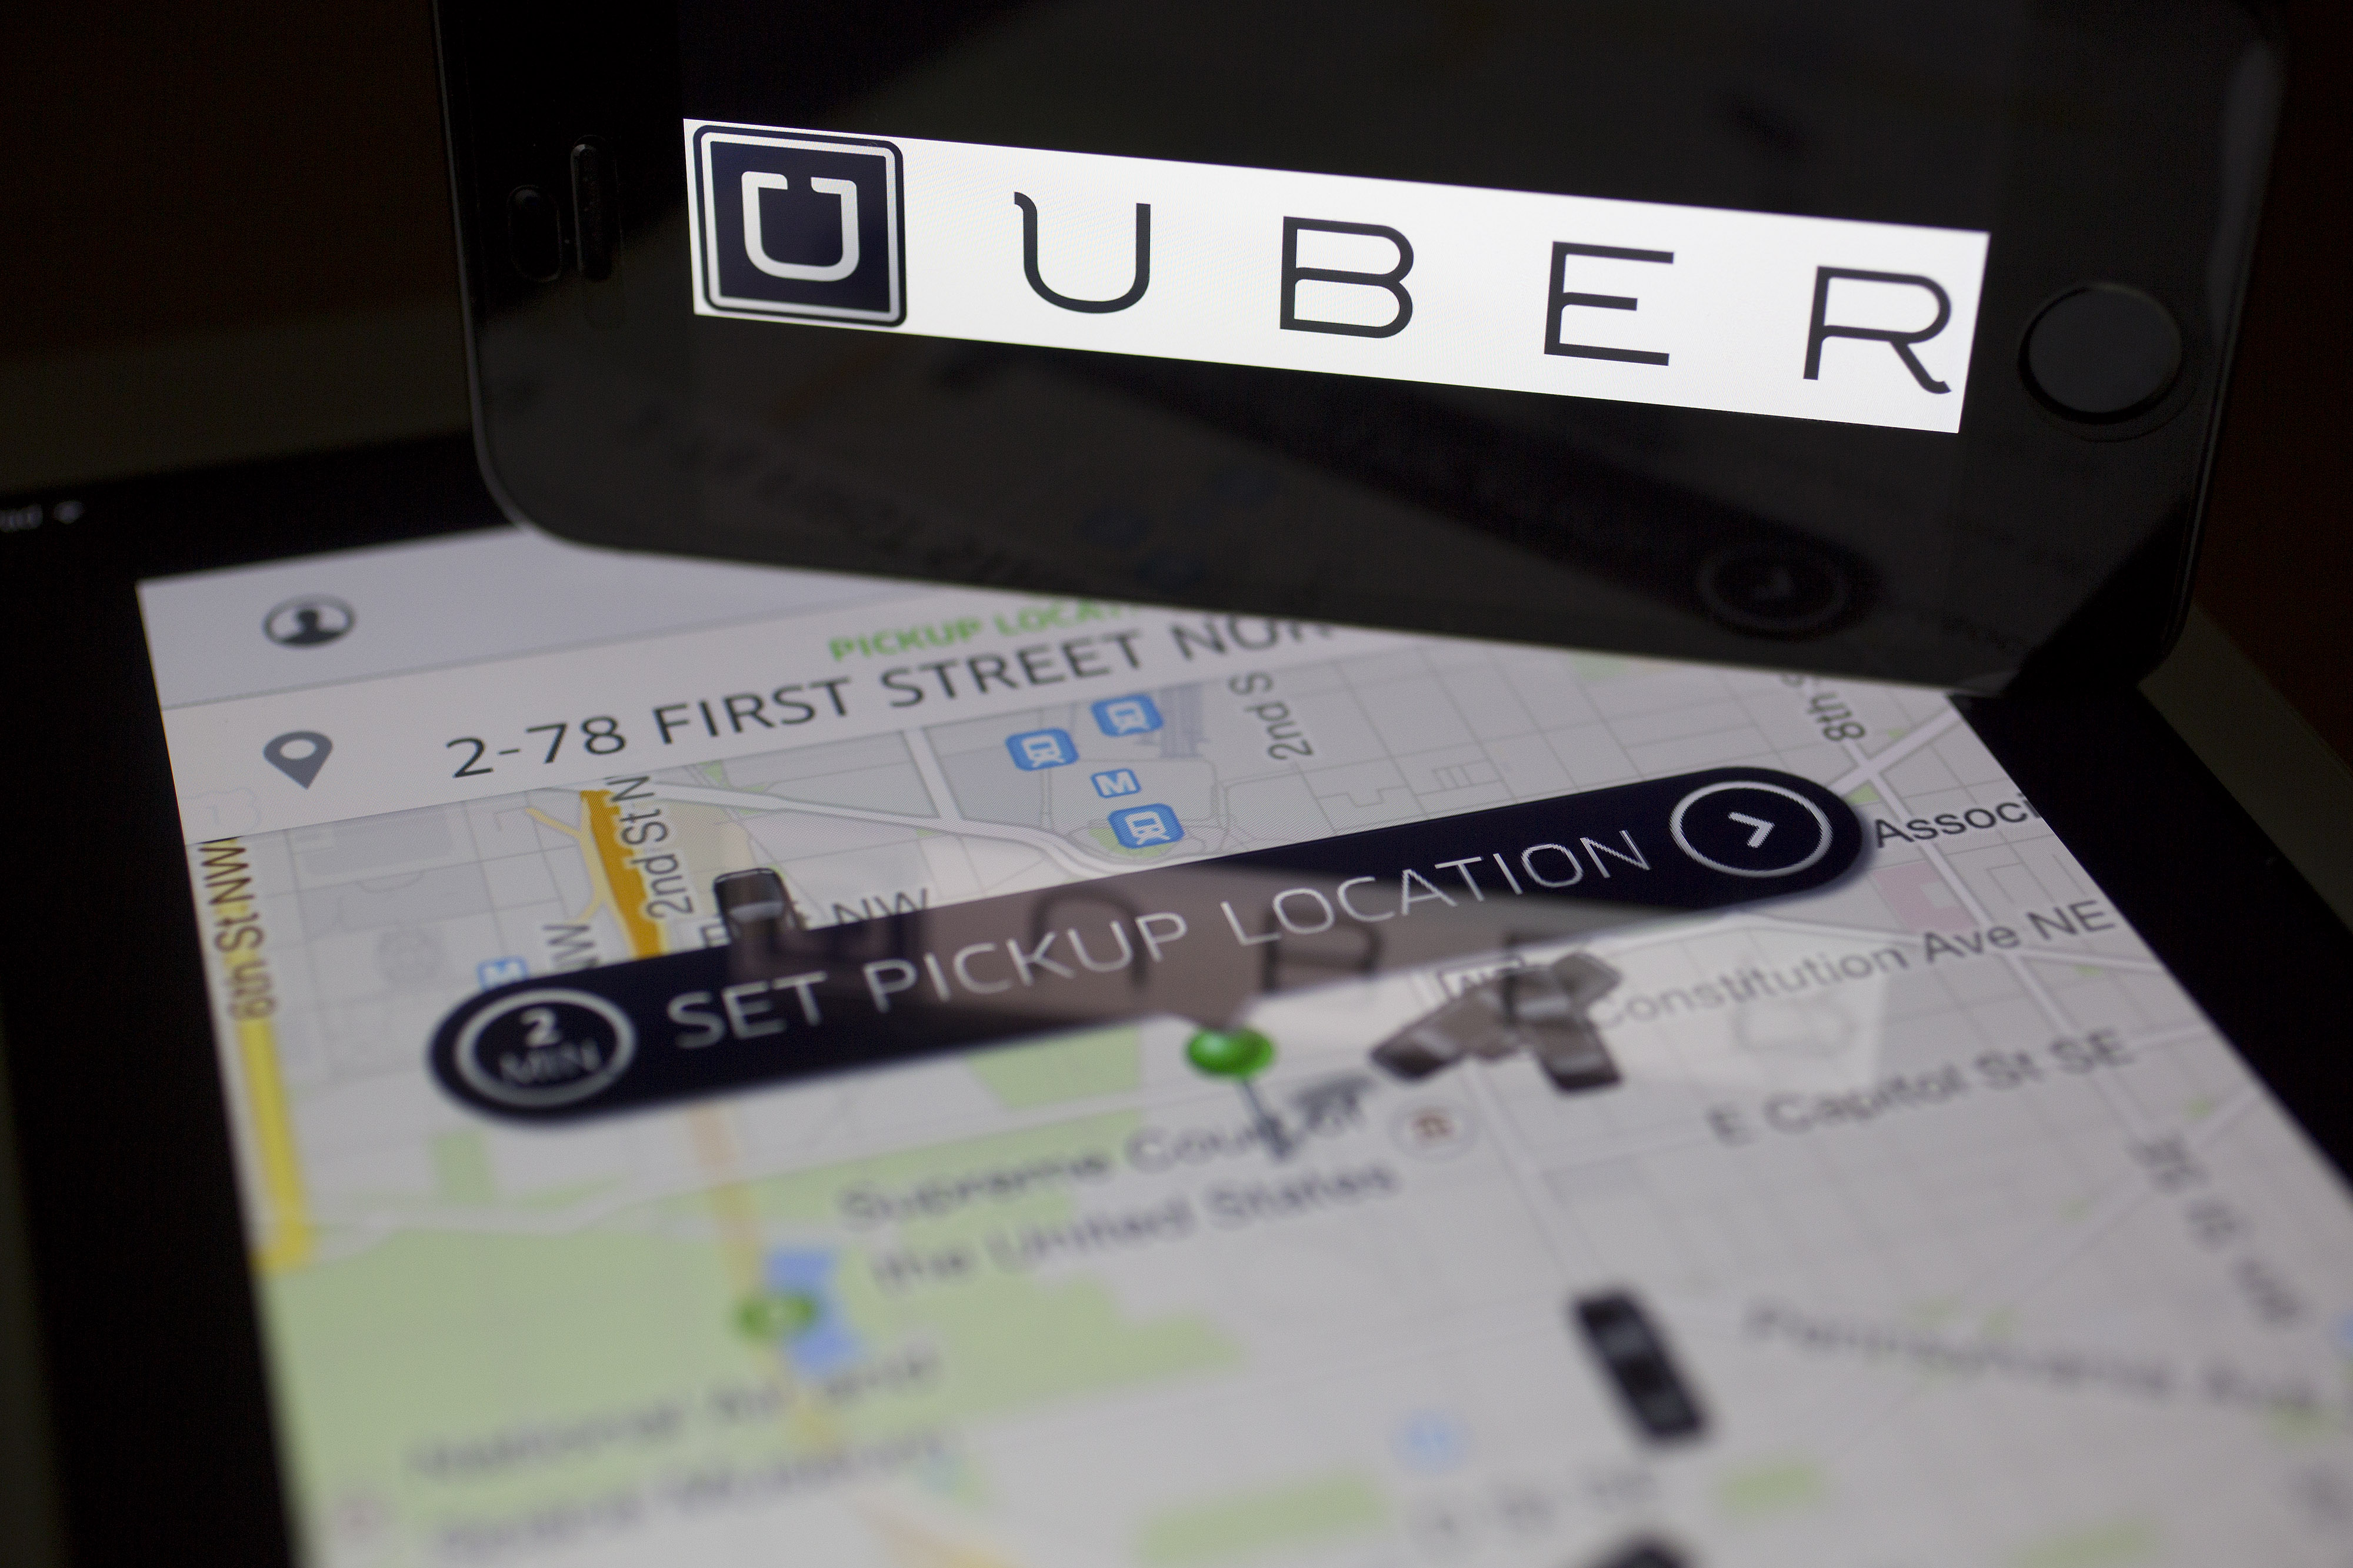 The Uber Technologies Inc. application and logo are displayed on an Apple Inc. iPhone 5s and iPad Air in this arranged photograph in Washington, D.C., U.S., on Wednesday, March 5, 2014. (Andrew Harrer—Bloomberg via Getty Images)